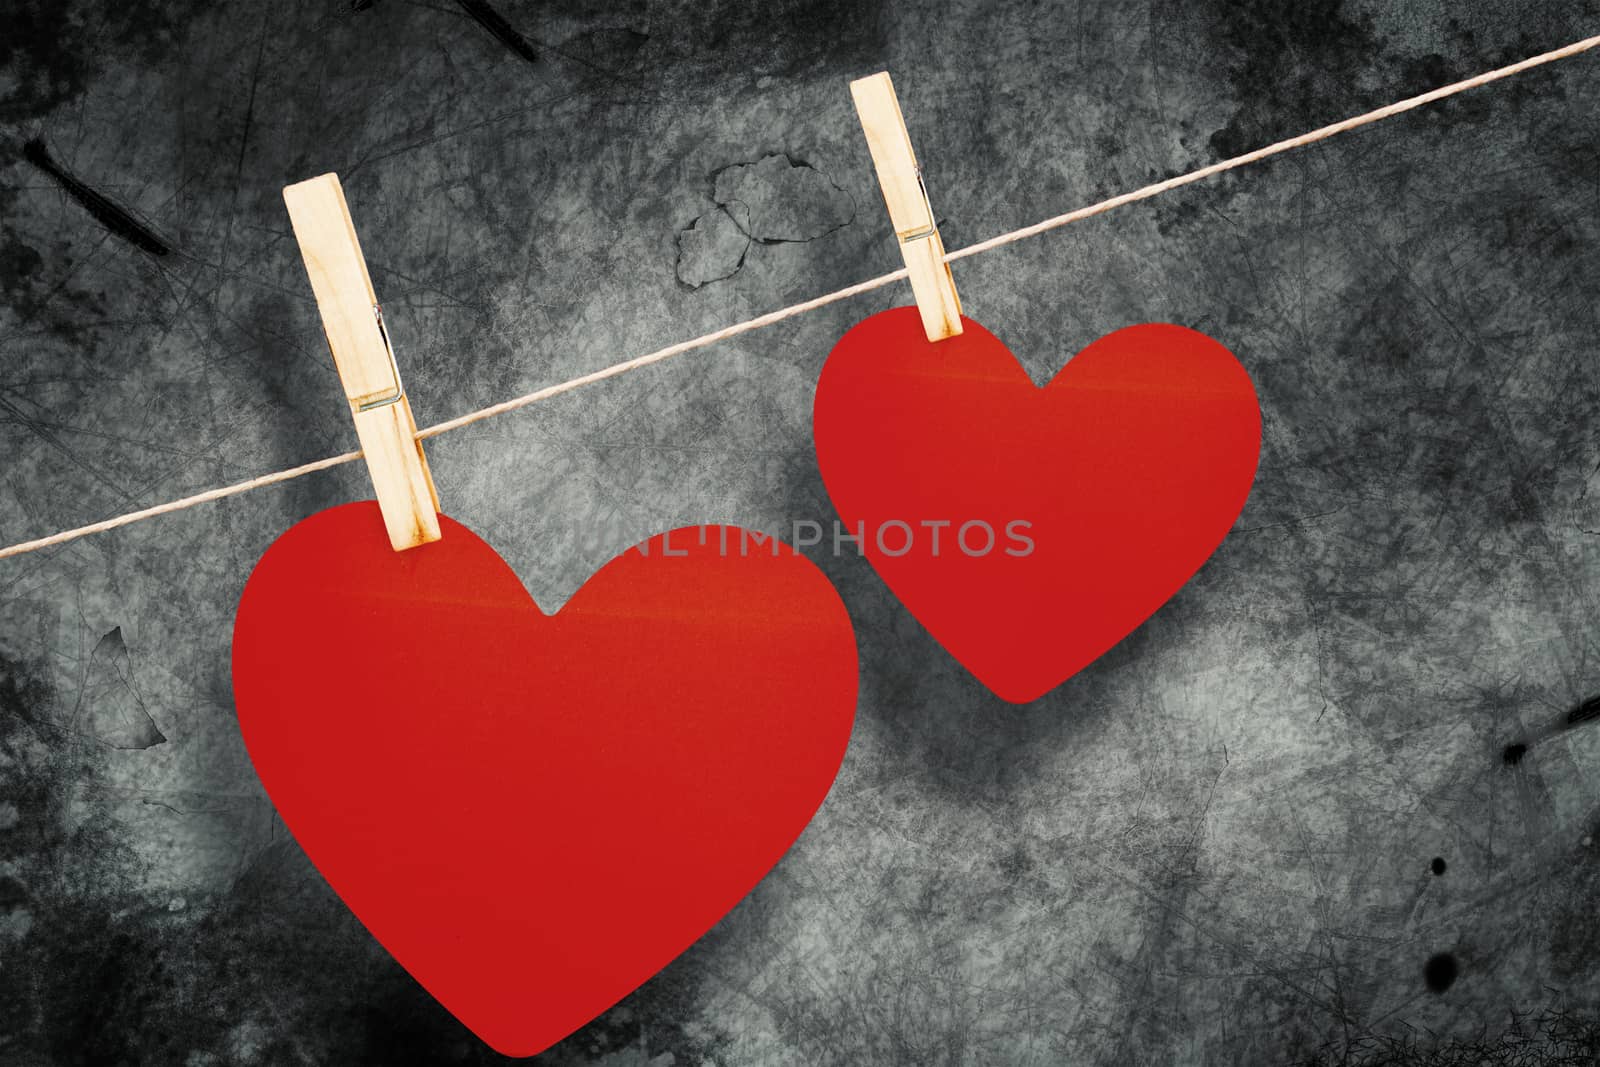 Hearts hanging on a line against grey background